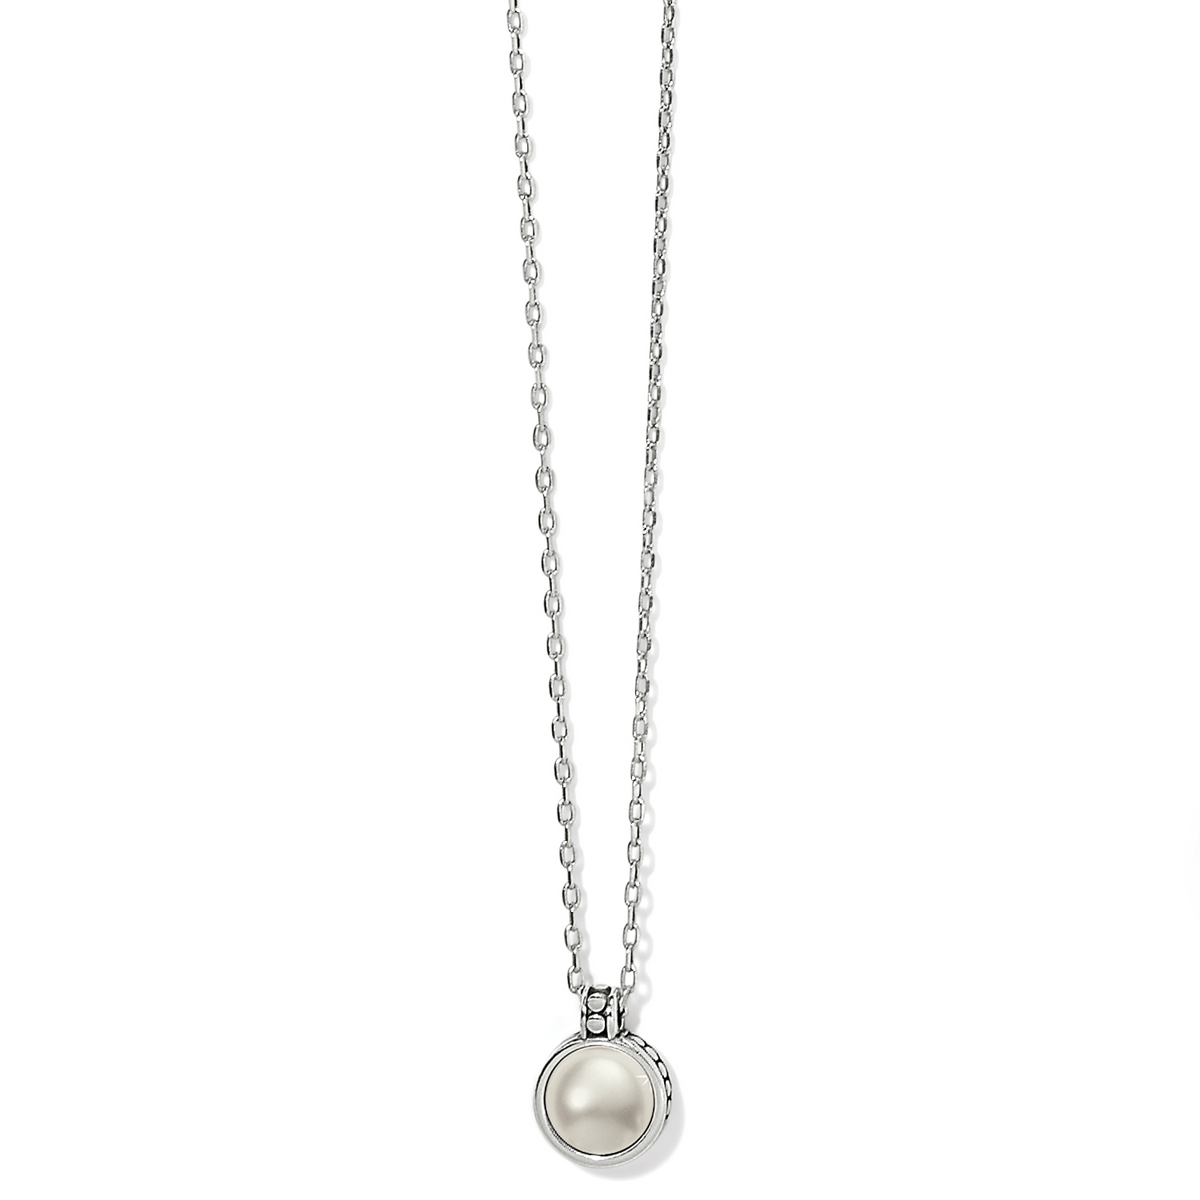 Pebble Dot Pearl Short Necklace by Brighton--Lemons and Limes Boutique